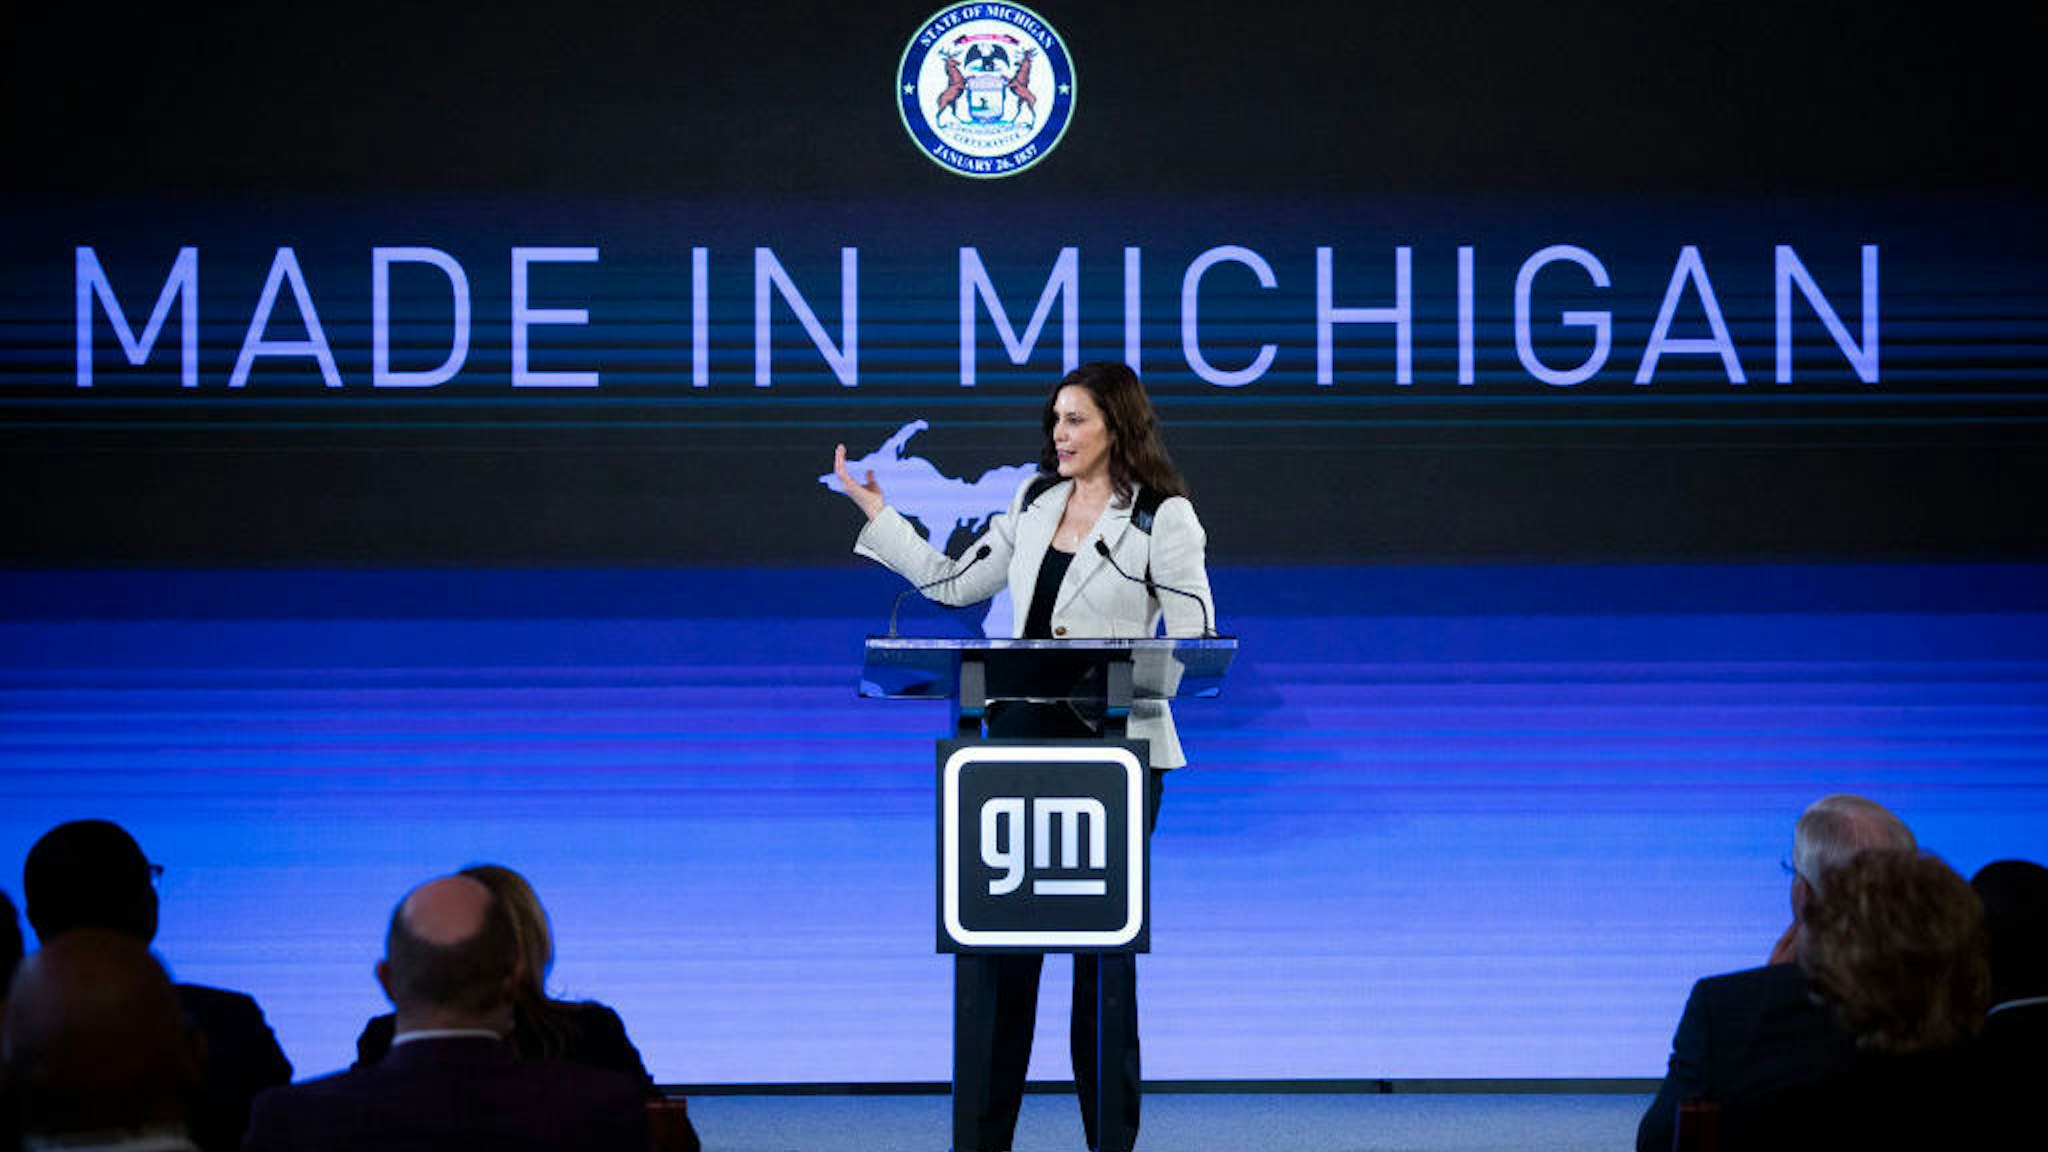 LANSING, MI - JANUARY 25: Michigan Governor Gretchen Whitmer speaks at an event at which General Motors announced they are making a $7 billion investment, the largest in the company’s history, in electric vehicle and battery production in the state of Michigan on January 25, 2022 in Lansing, Michigan. The investment will be used at 4 facilities in Michigan and will create 4,000 jobs. (Photo by Bill Pugliano/Getty Images)